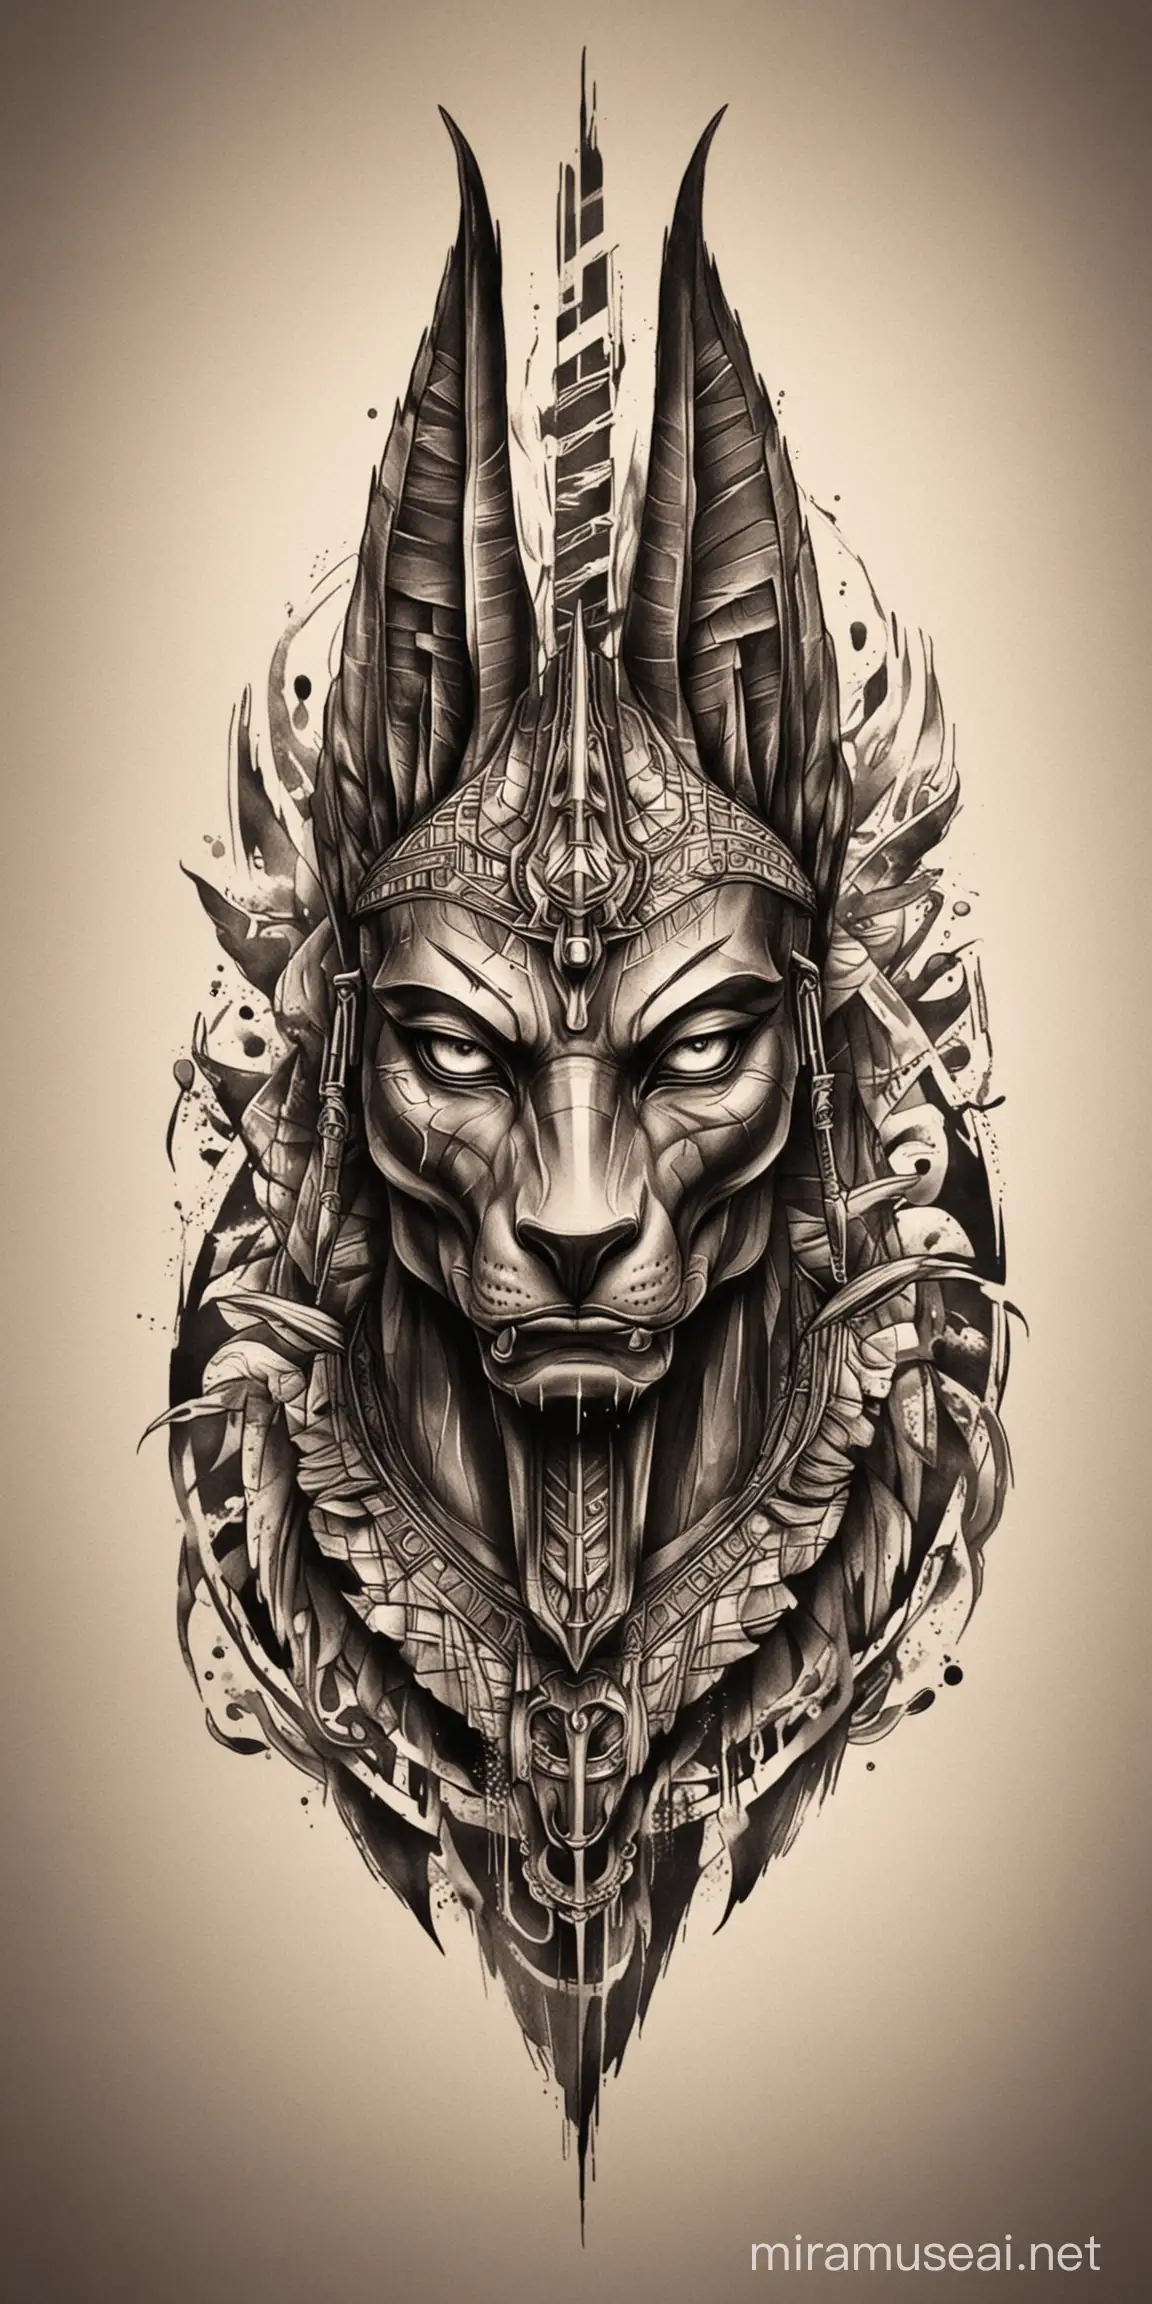 Fierce Anubis Tattoo Design Depicting the Anger of the Egyptian God